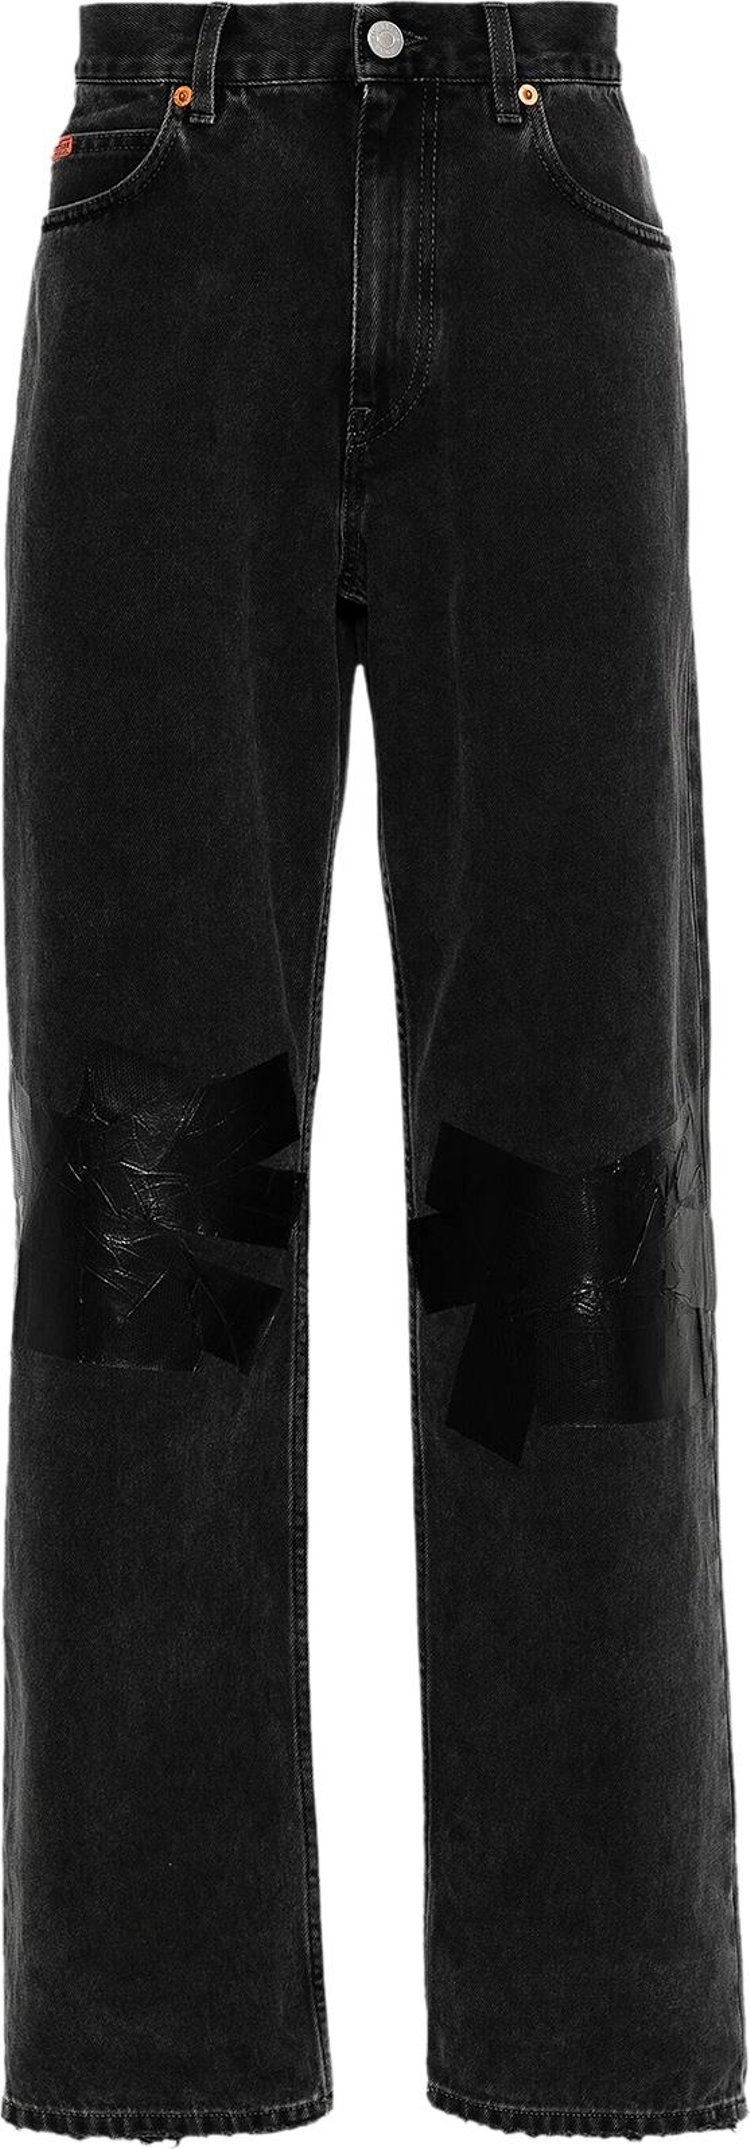 Martine Rose Relaxed Fit Jeans 'Black Wash'